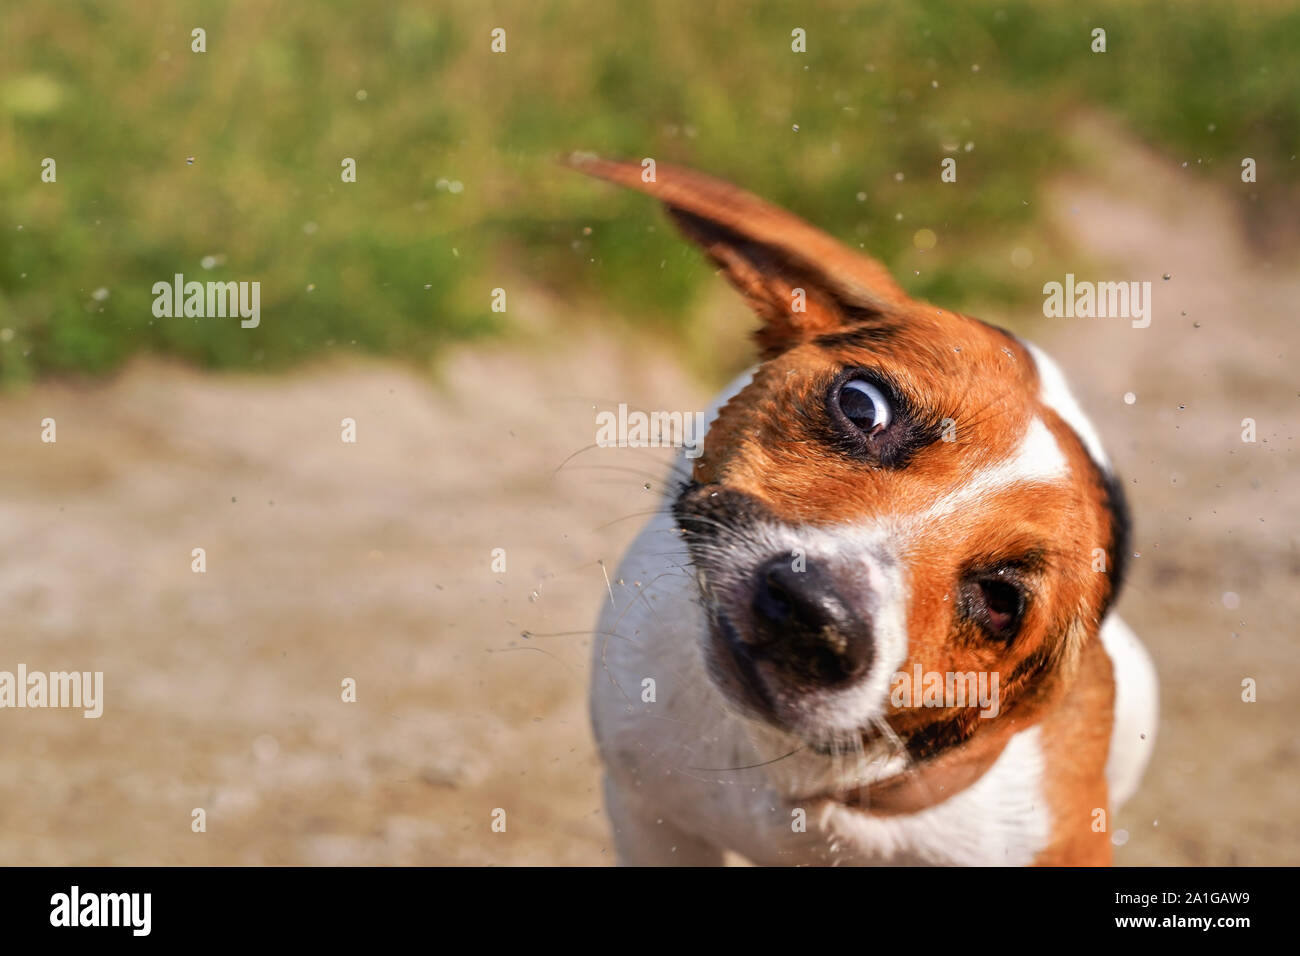 Small Jack Russell terrier dog drying, shaking head to remove water, detail on her face with blurred path and grass in background Stock Photo